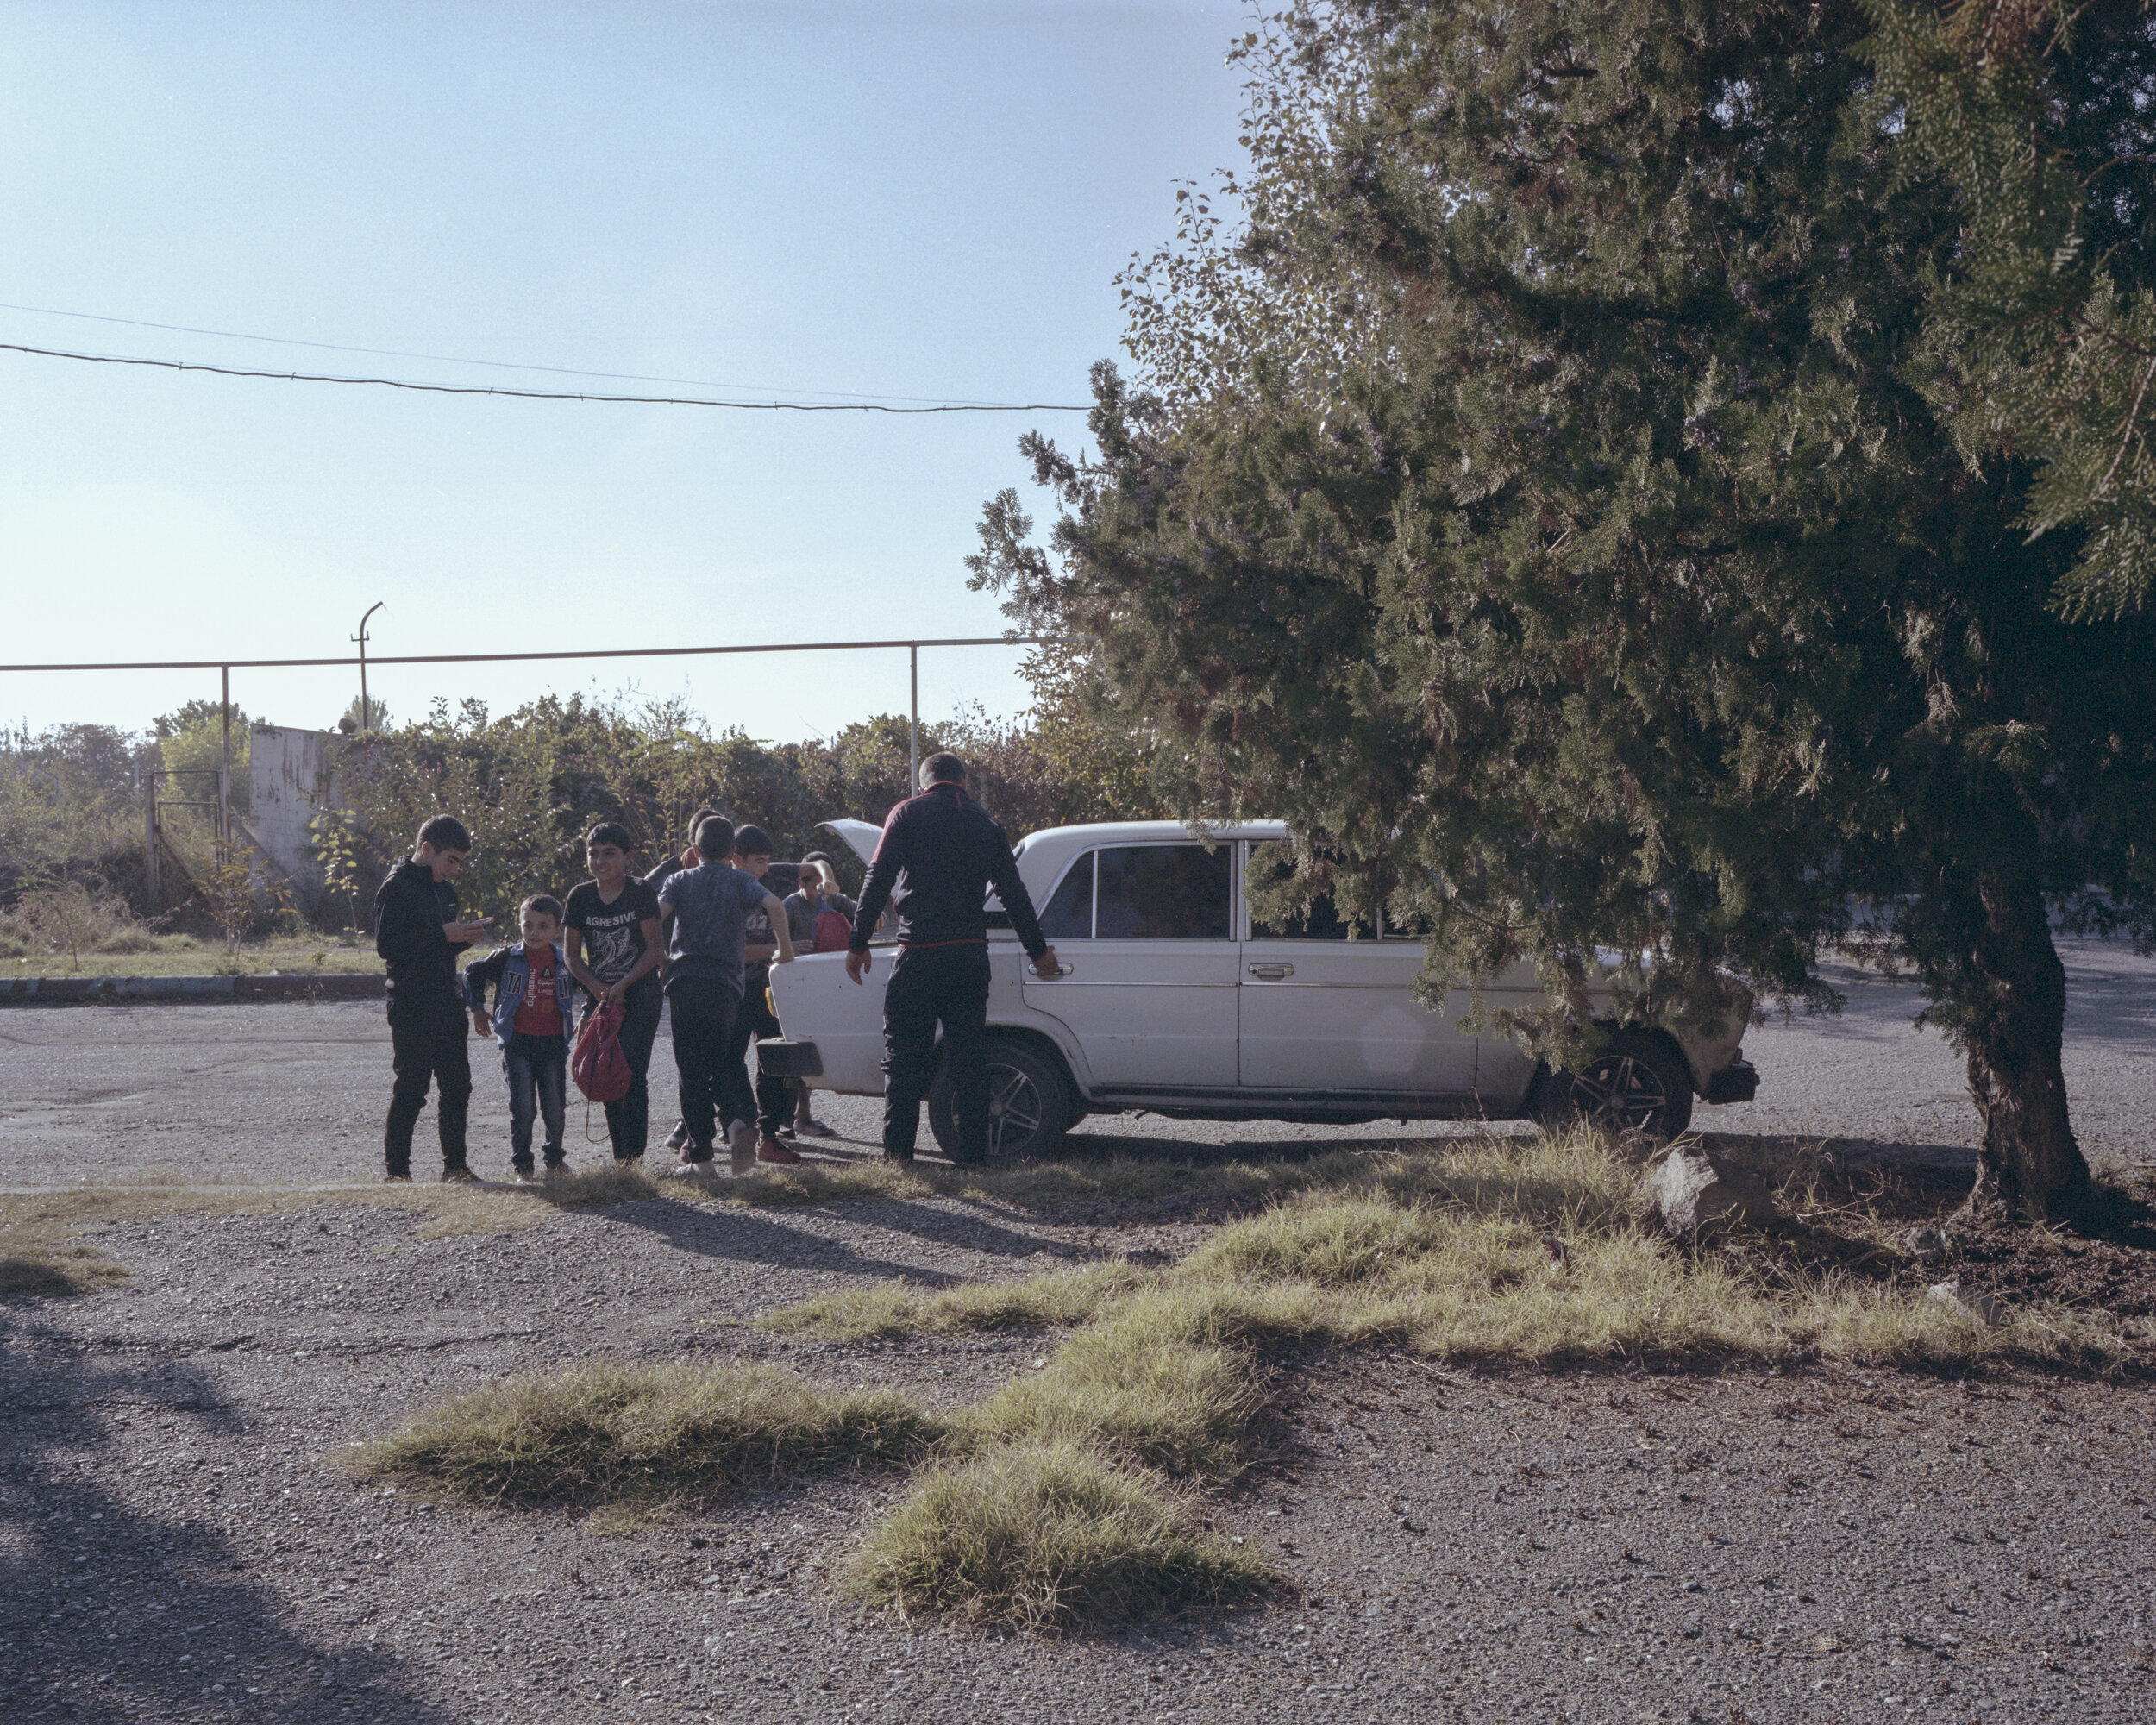   A bunch of kids arrive for training in an old Lada. Their trainer, Gagik Xegiazaryan, collected them at different points of the village and drove them to the sports complex.    Metsamor, Armenia, 2018  